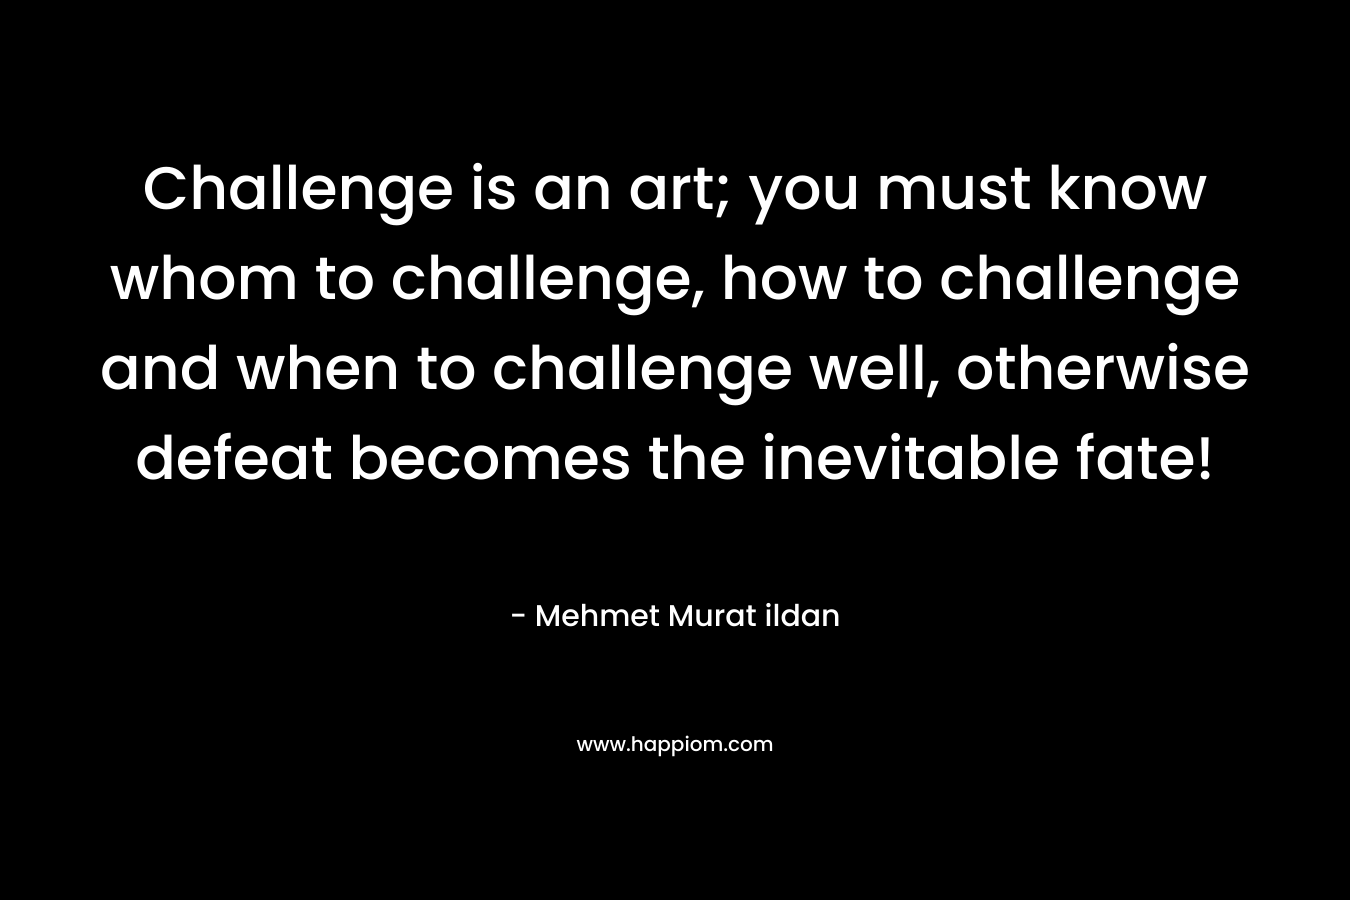 Challenge is an art; you must know whom to challenge, how to challenge and when to challenge well, otherwise defeat becomes the inevitable fate!